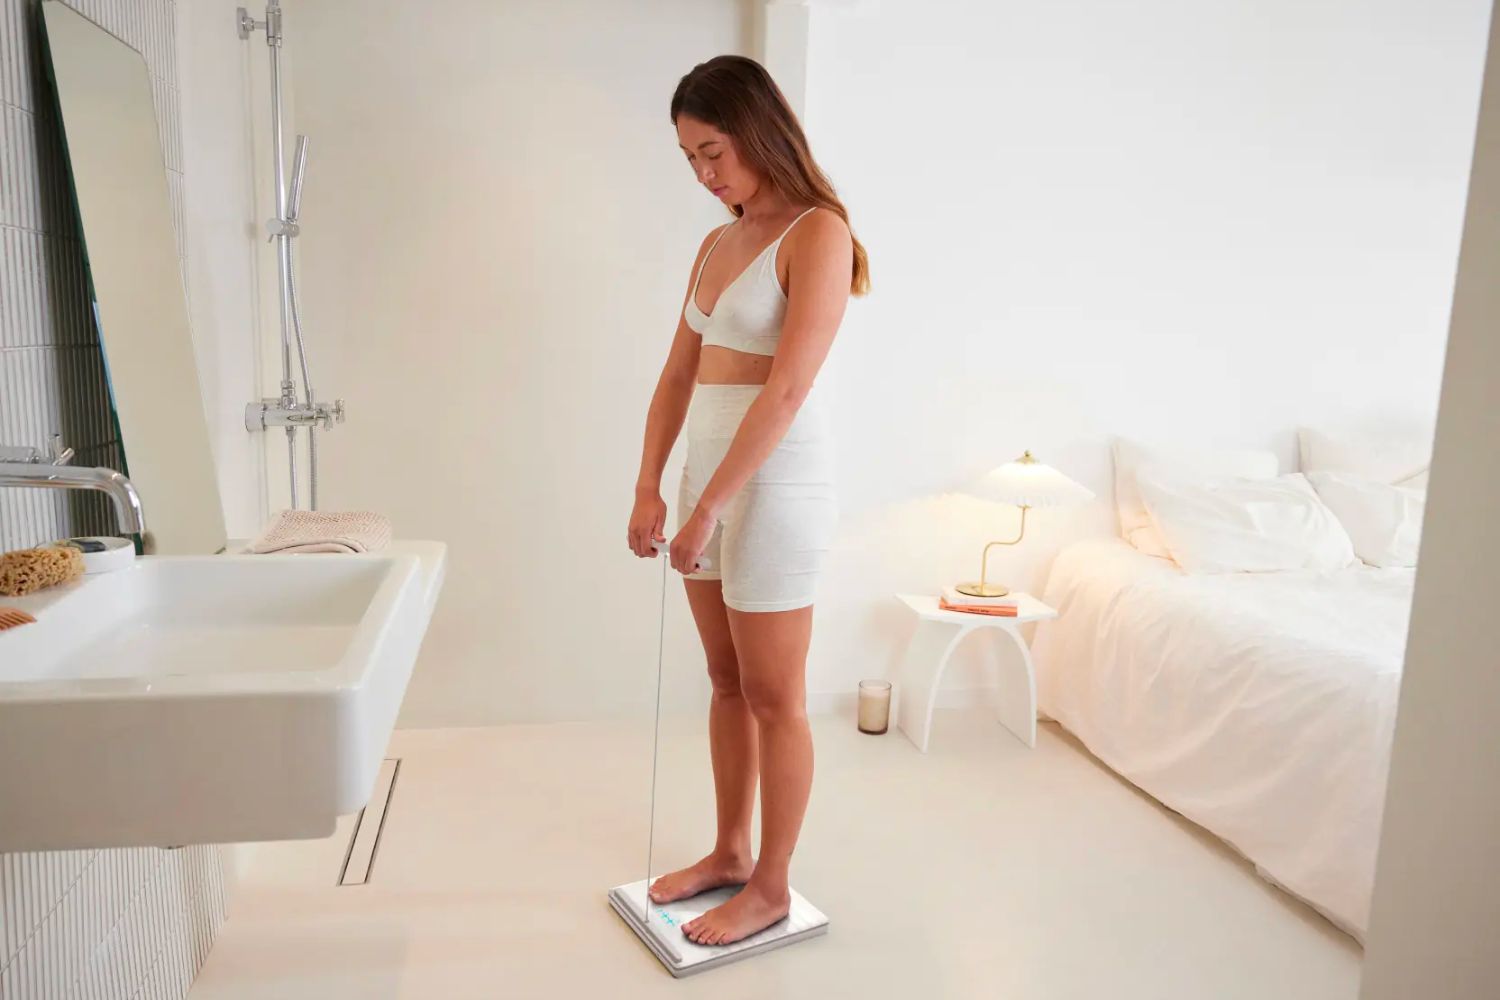 Withings Body Scan